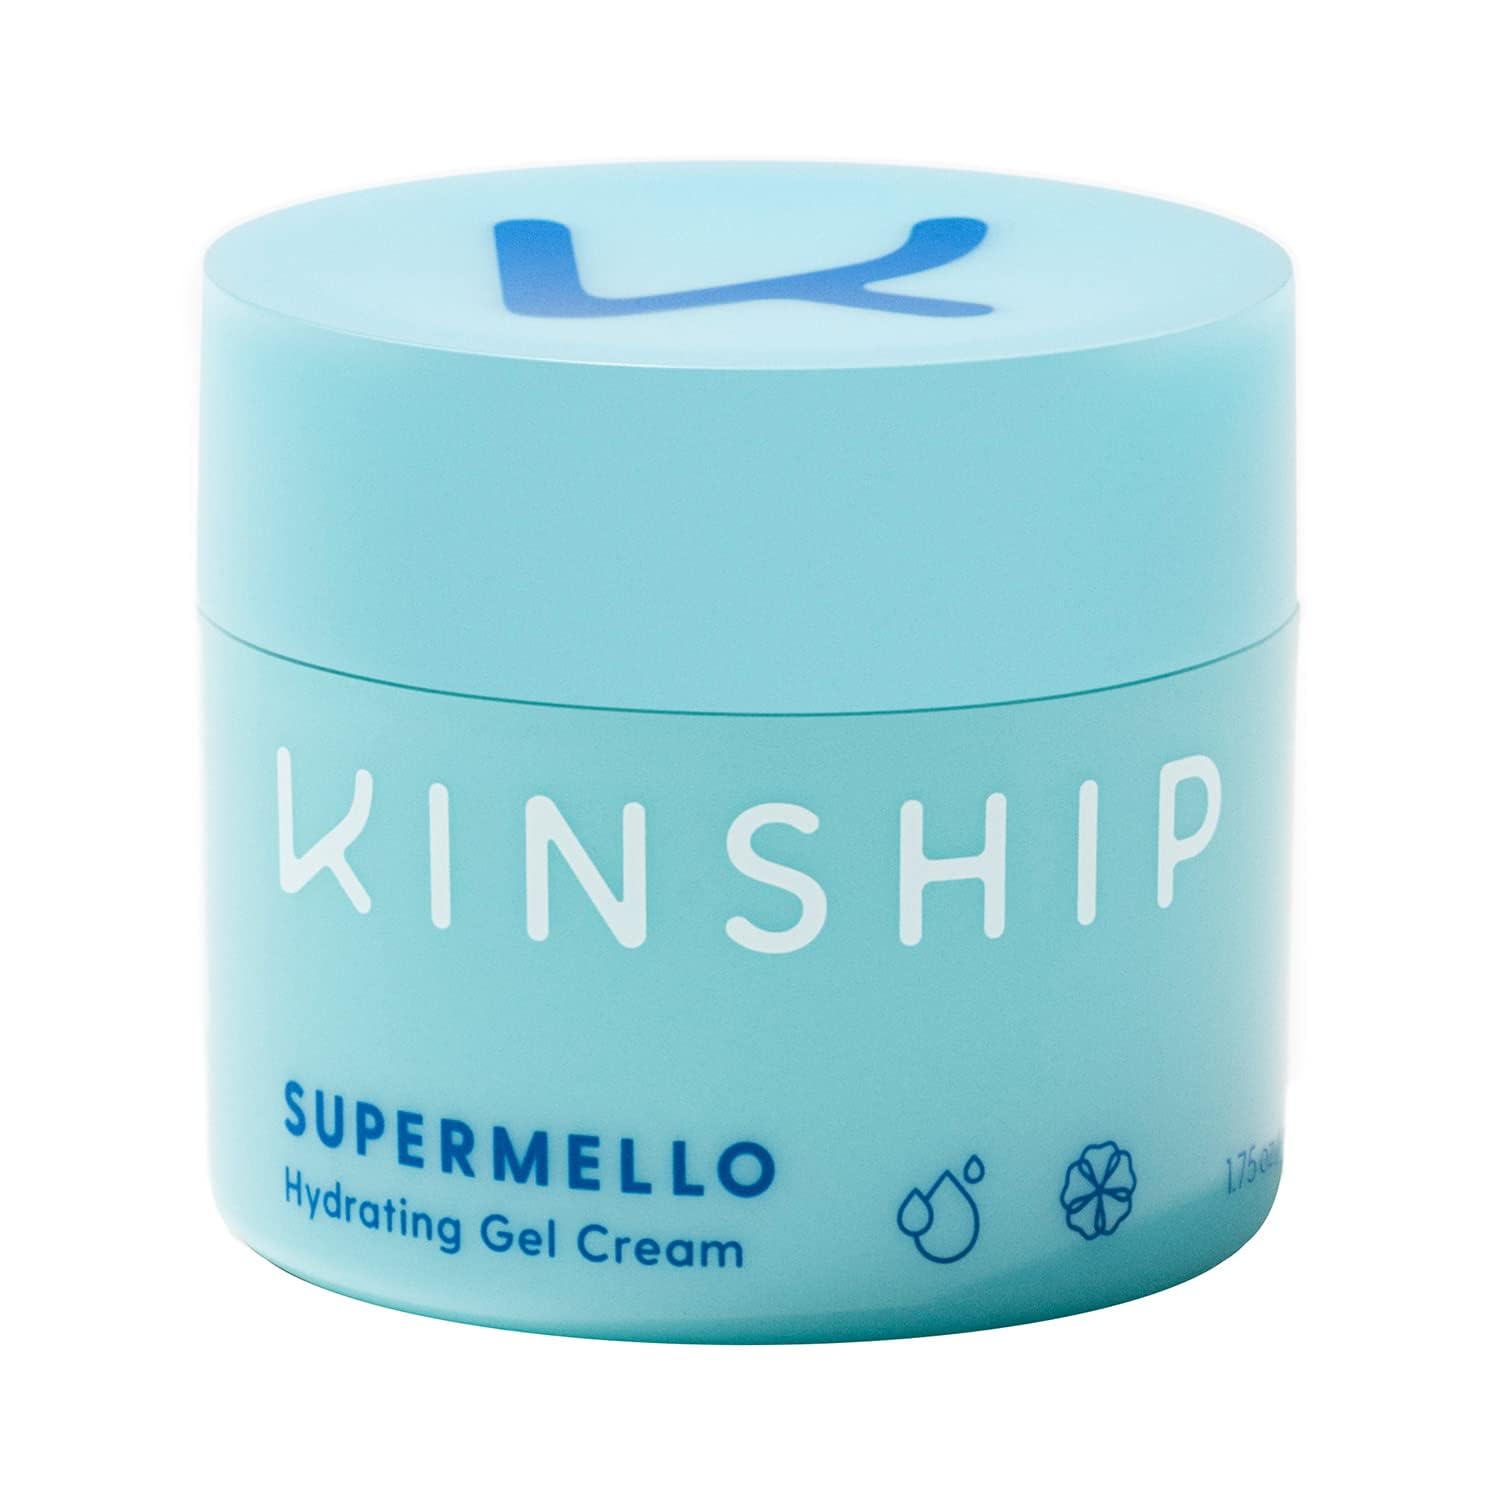 Kinship Supermello Hyaluronic Gel Cream Moisturizer – Nourish + Soothe Dry Sensitive Skin – Lightweight, Hydrating Face Lotion – Plump + Smooth – Reduce Redness – Daily Use Clean Skin Care (1.75 oz)